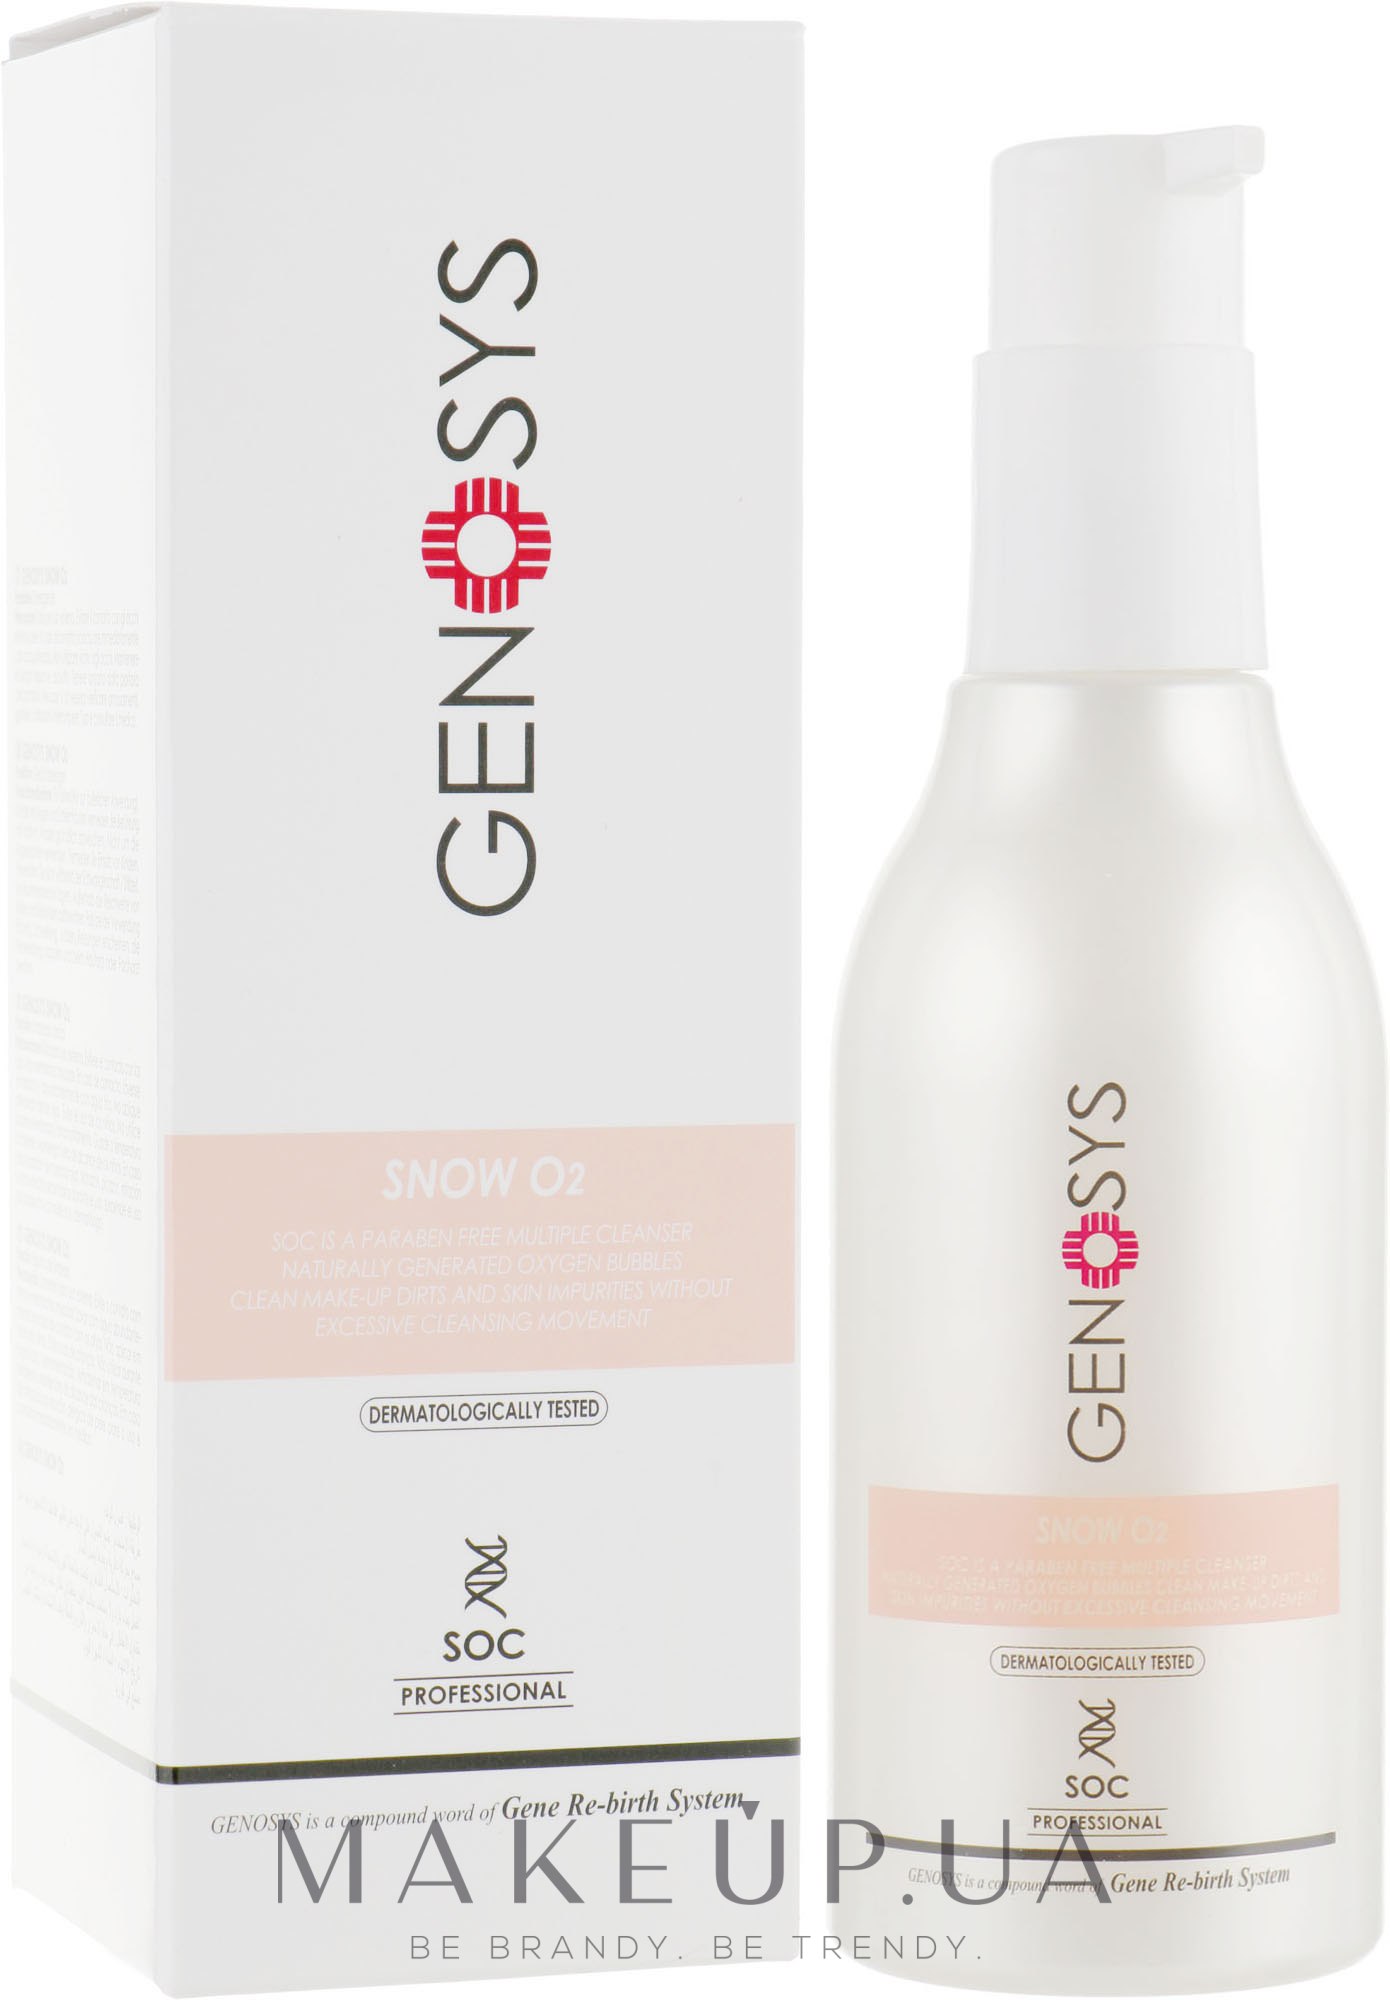 Genosys Snow O2 Cleanser